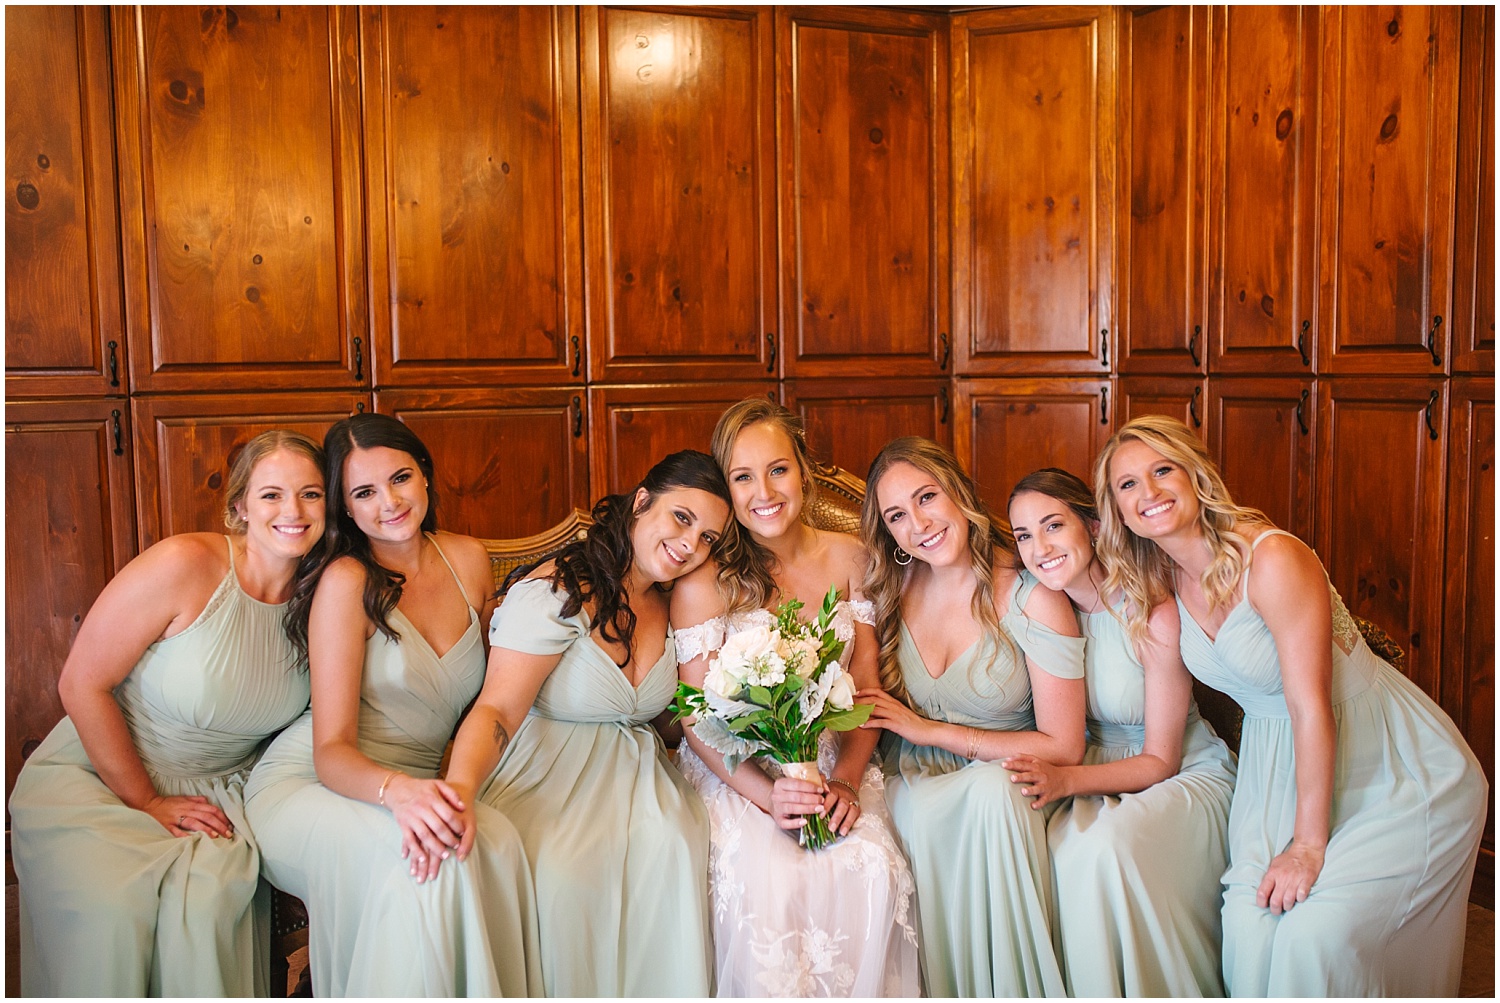 Bride with bridesmaids before the wedding ceremony at Crooked Willow Farms bridal suite